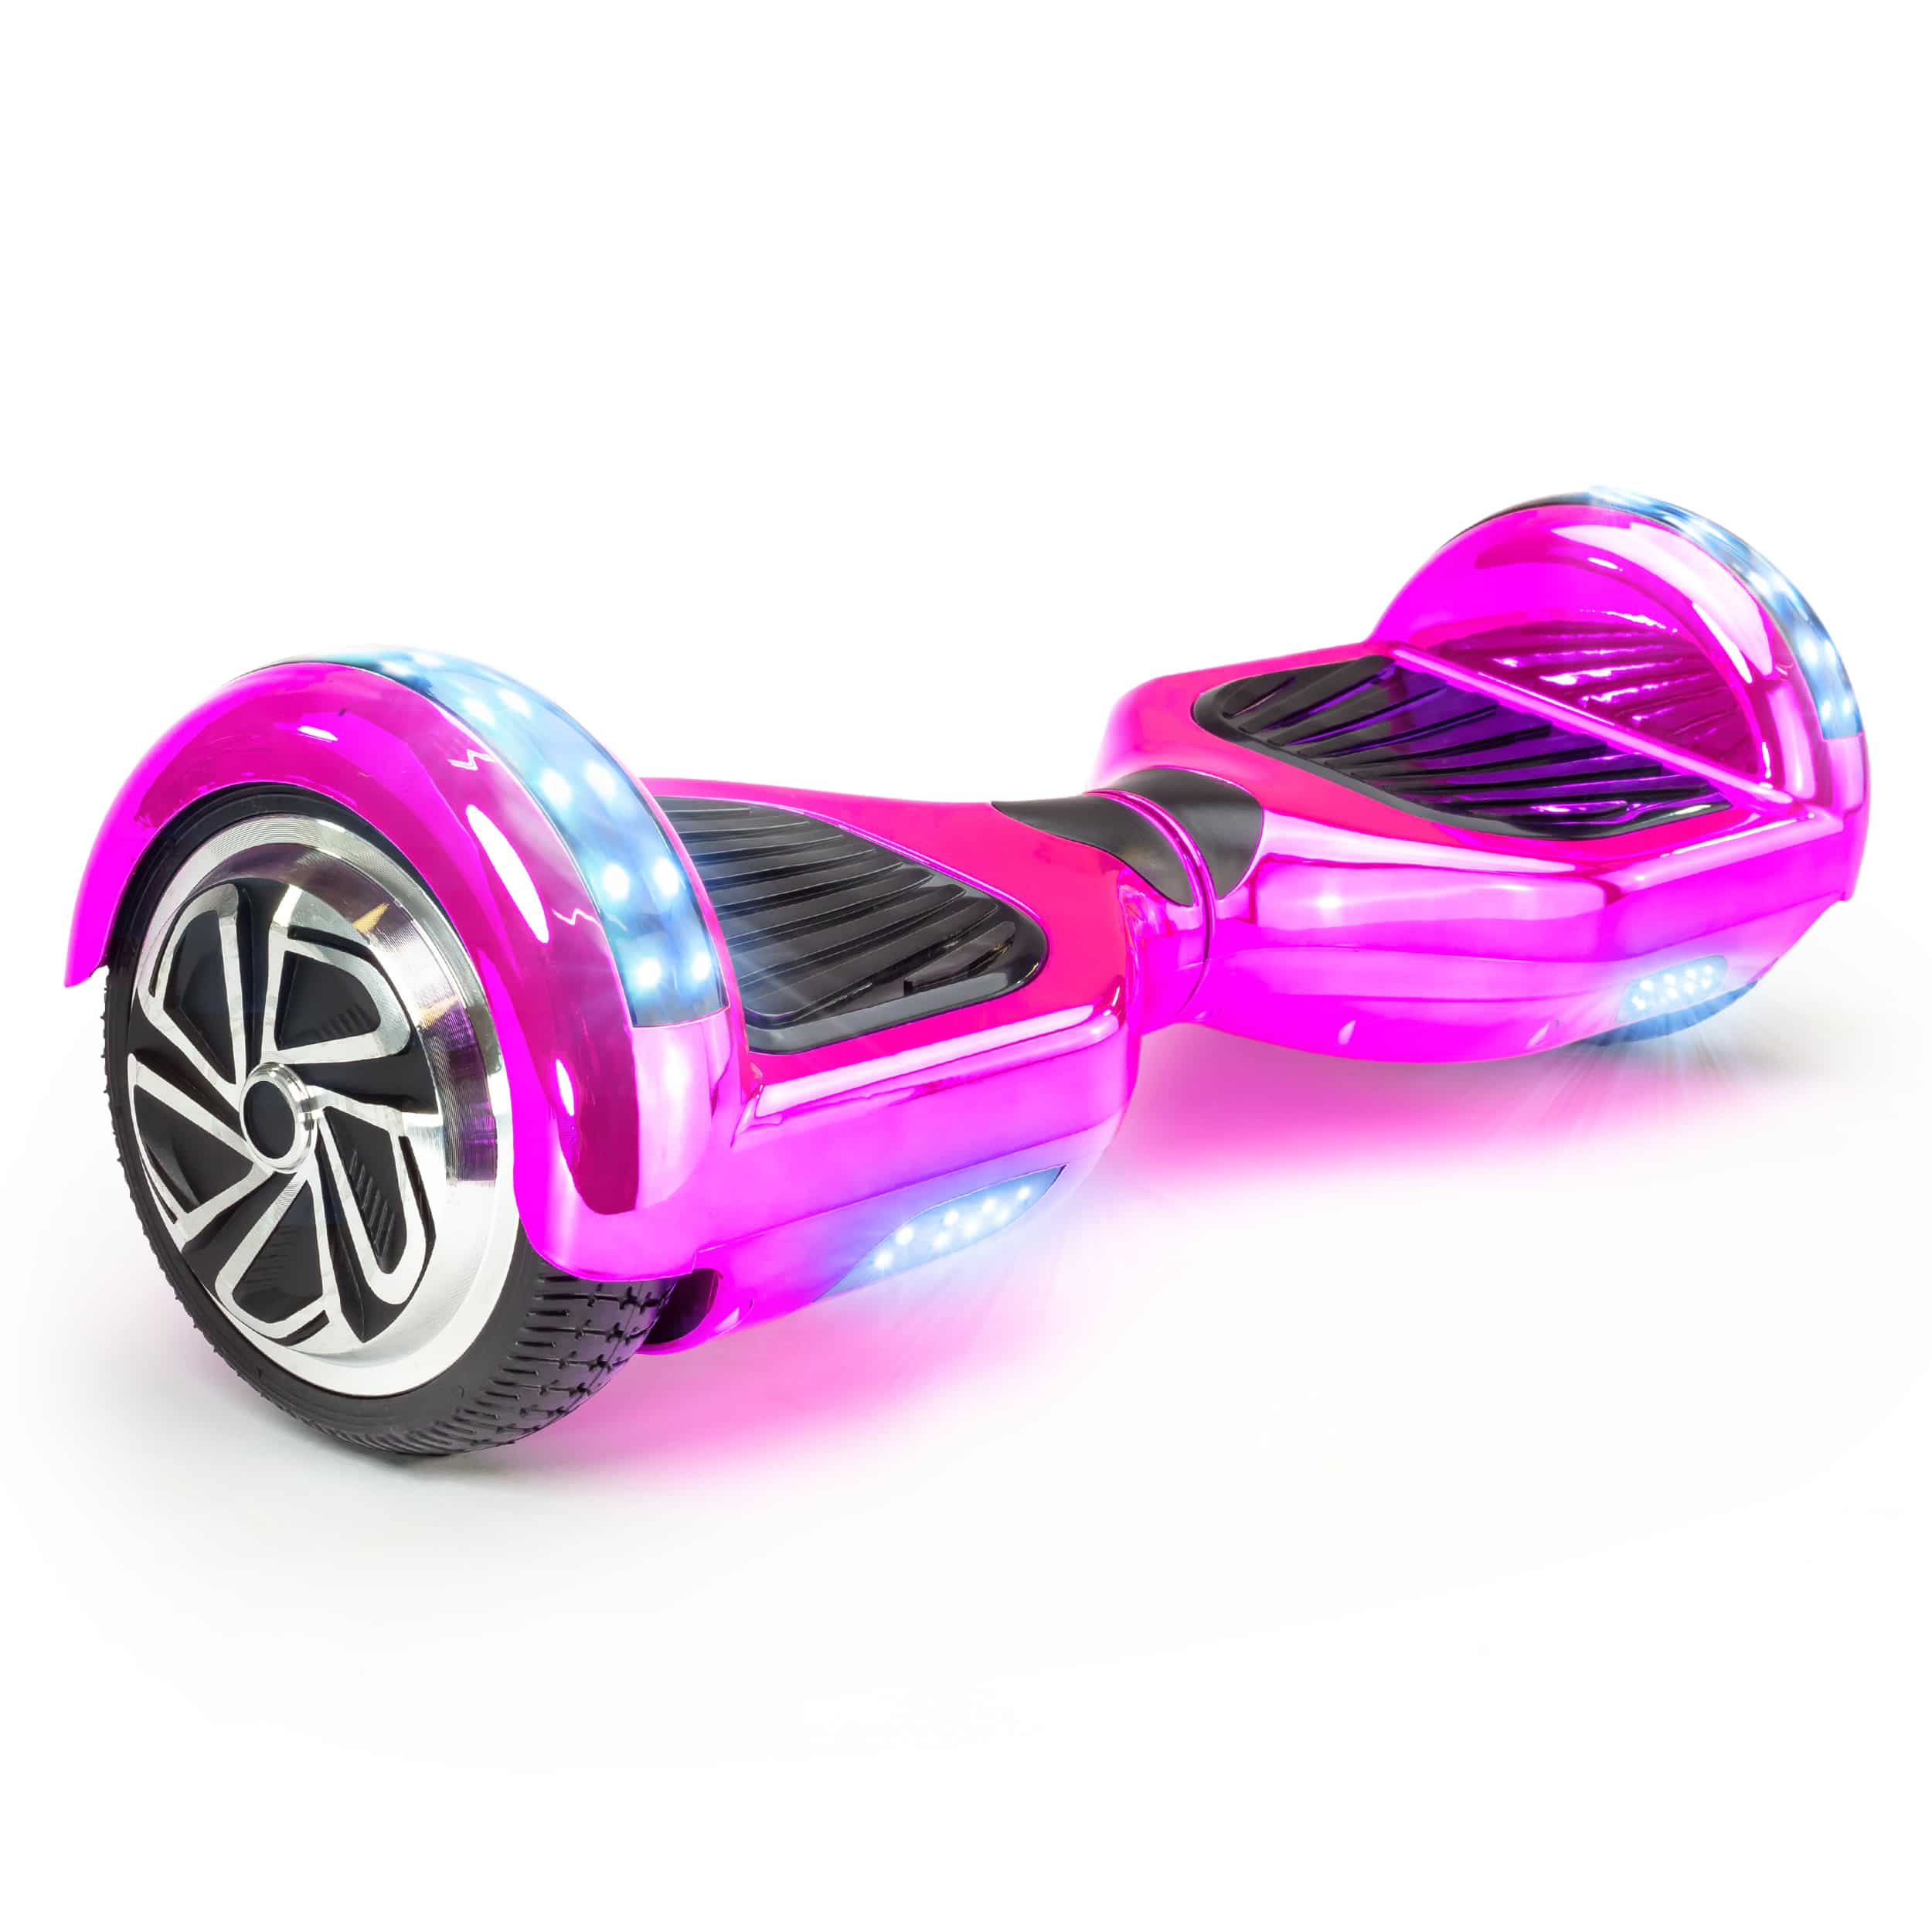 Pink Chrome X6 Hoverboard